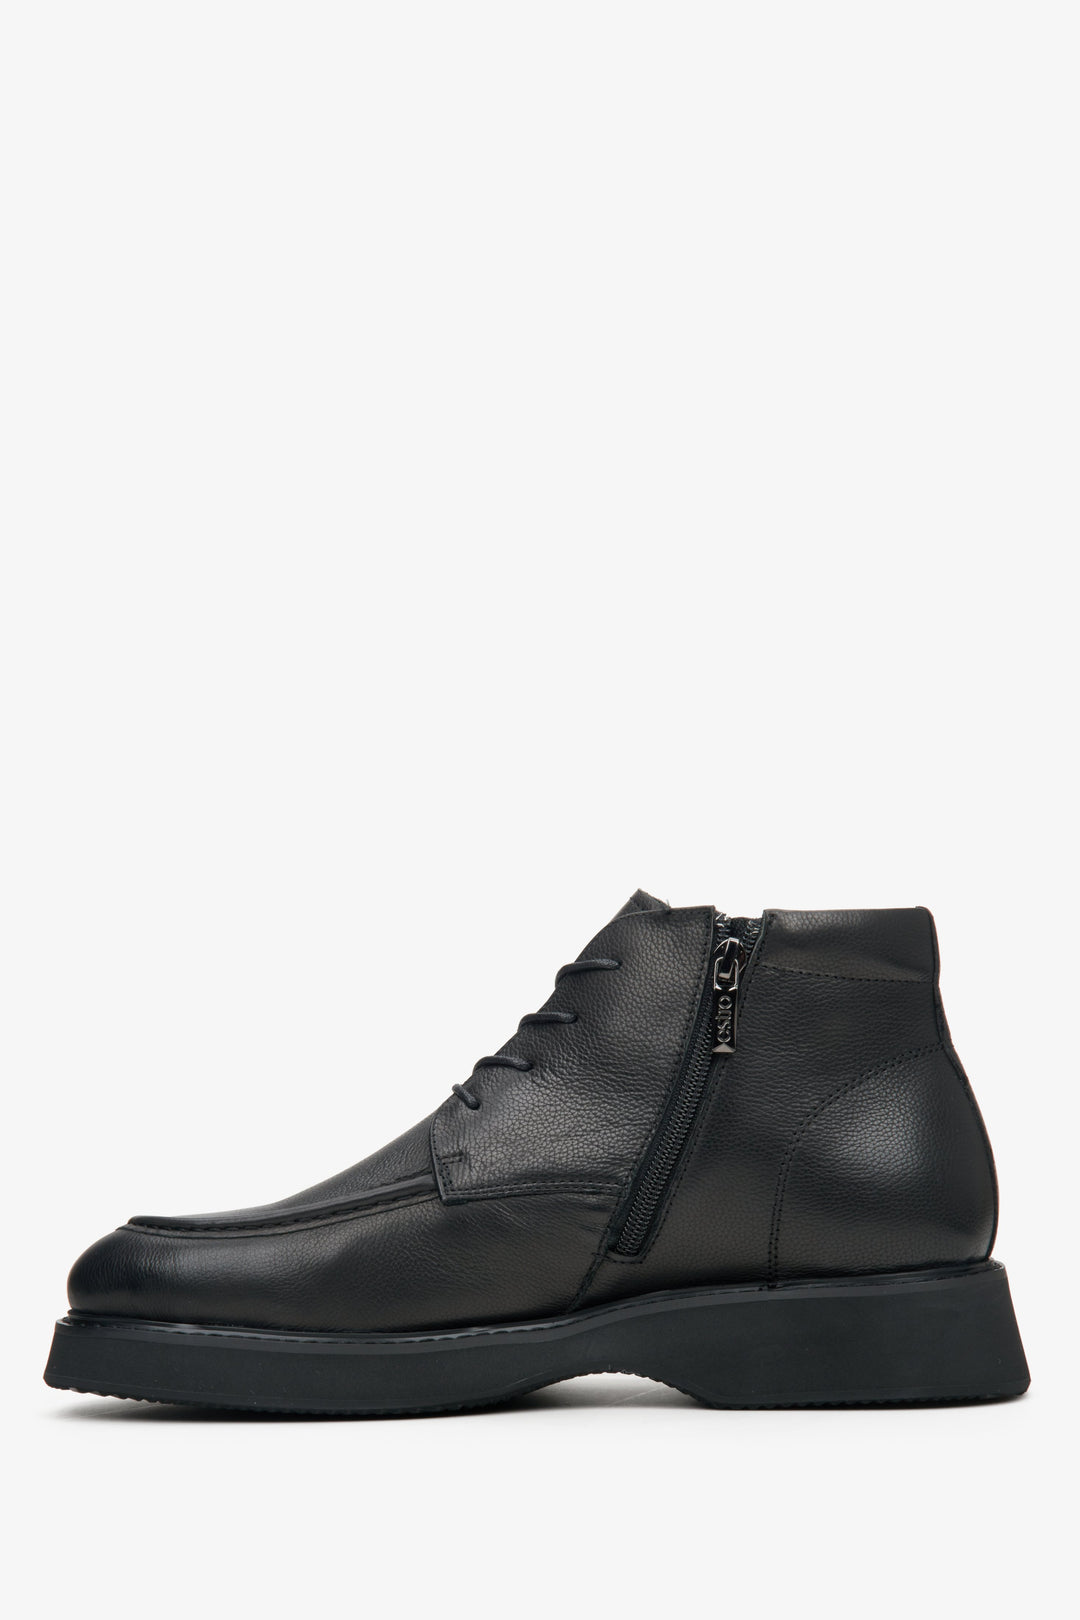 Men's black Estro boots made of leather - side view.